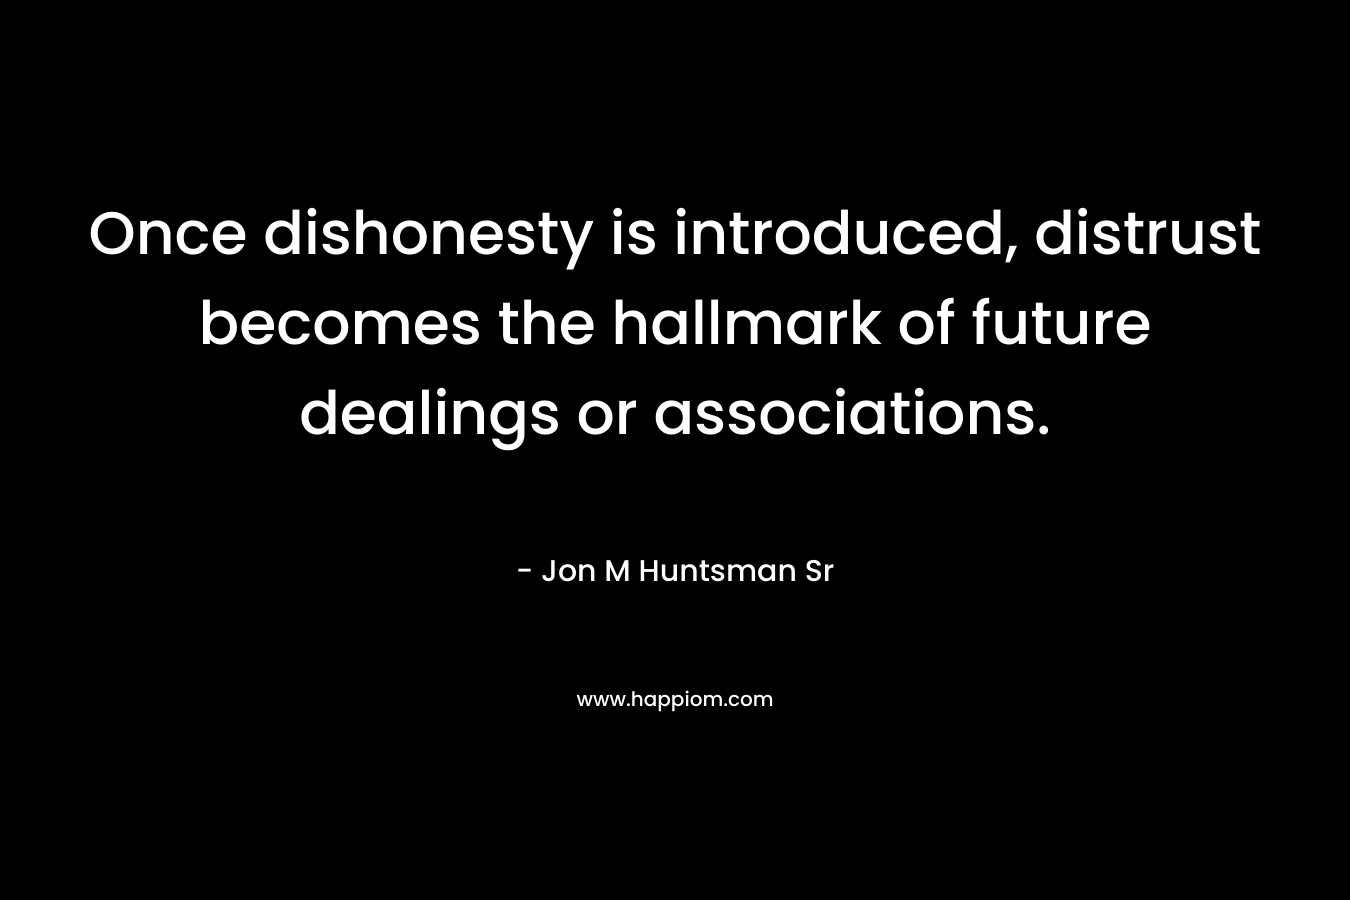 Once dishonesty is introduced, distrust becomes the hallmark of future dealings or associations. – Jon M Huntsman Sr